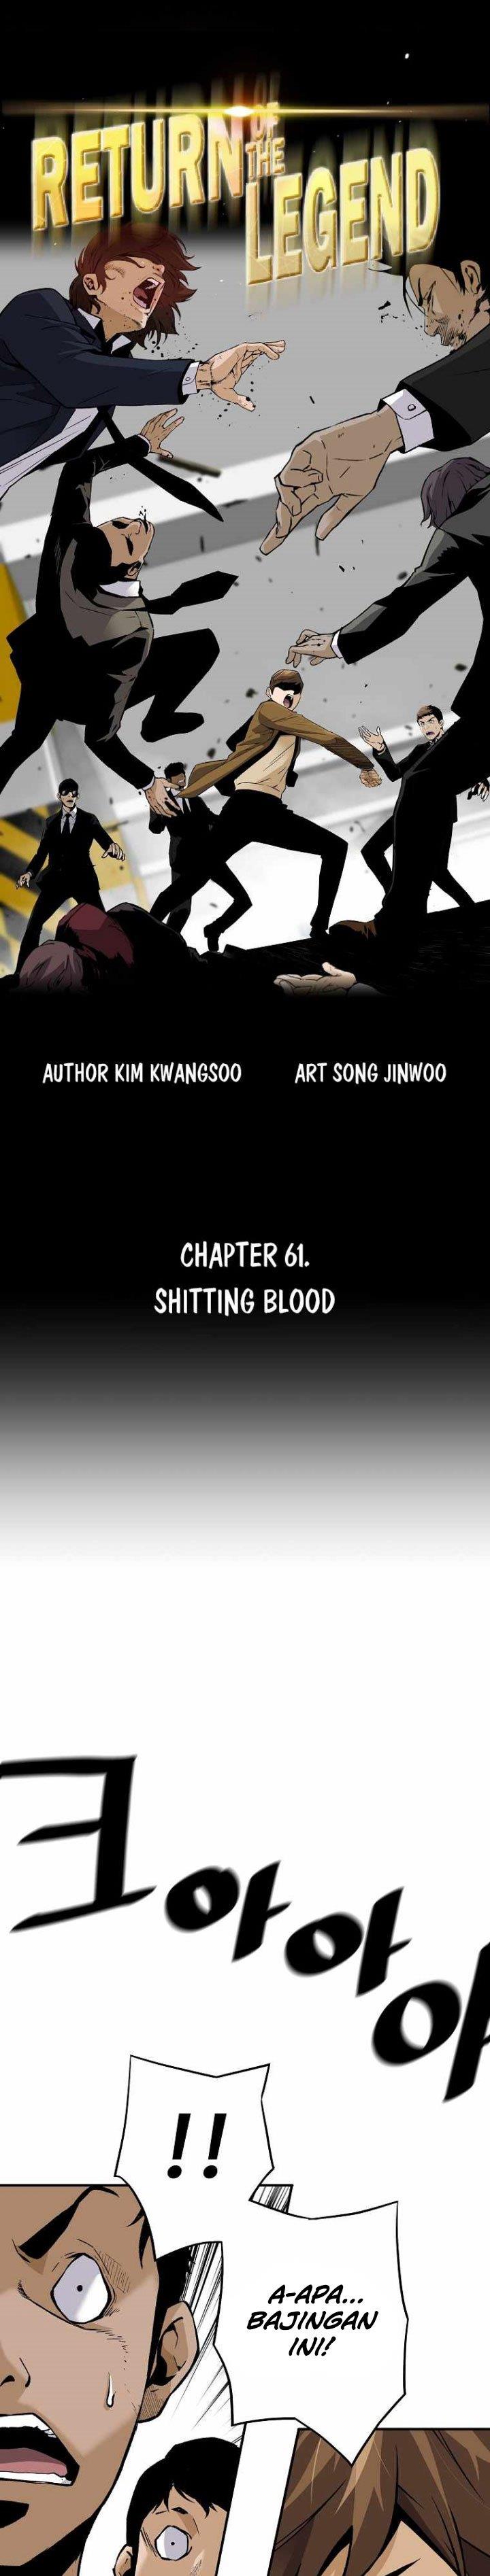 Return of the Legend Chapter 61